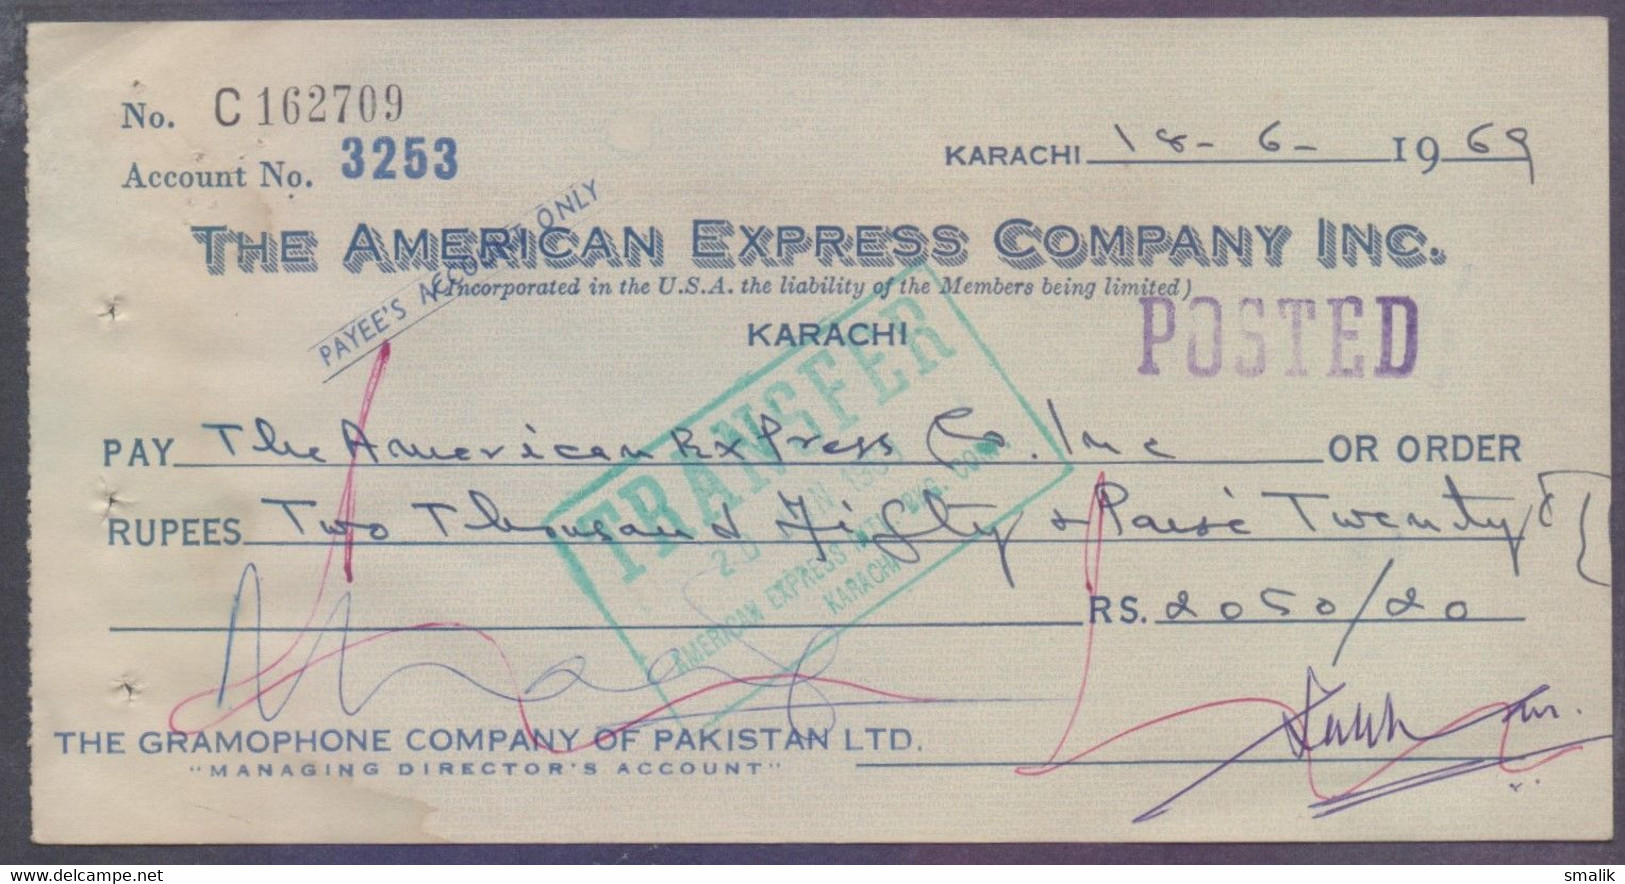 14.6.1969　Old　The　Inc.　on　Express　cheques　Pakistan　cheque　Karachi　traveler's　for　USA,　Bank　from　Company　American　Cheques　(162709)